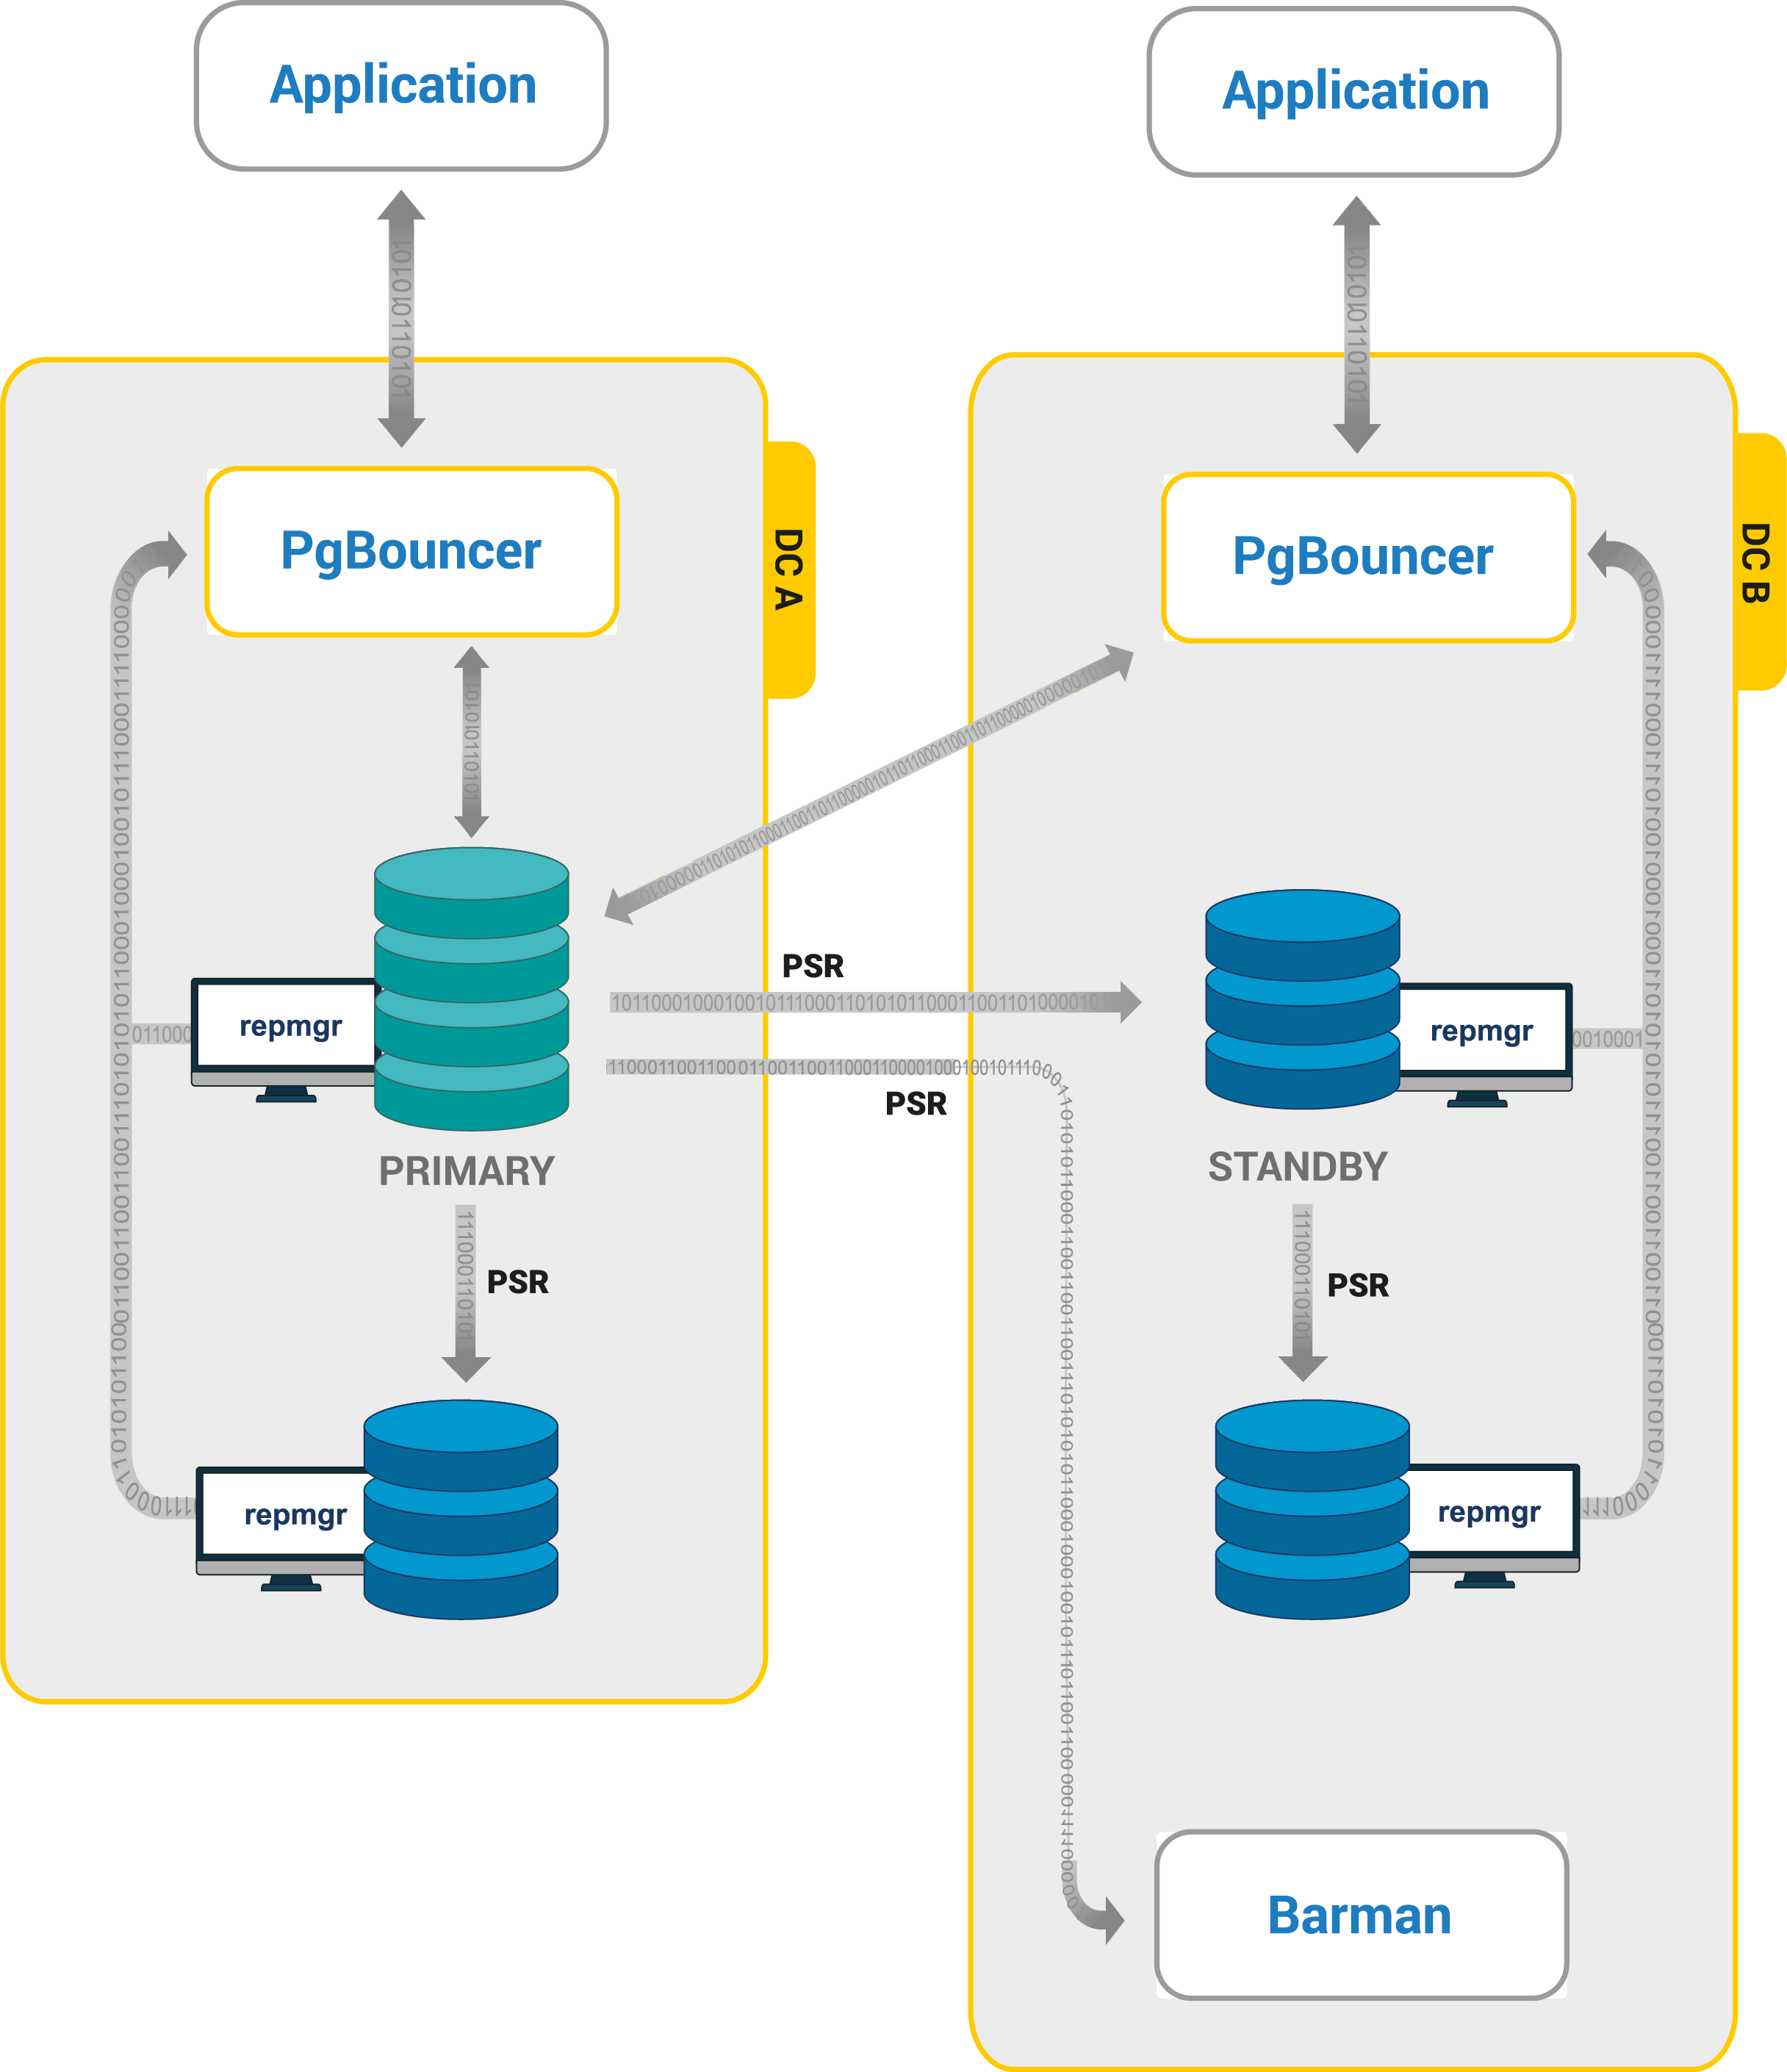 Highly Available Postgres Clusters Architecture, HA PostgreSQL Clusters